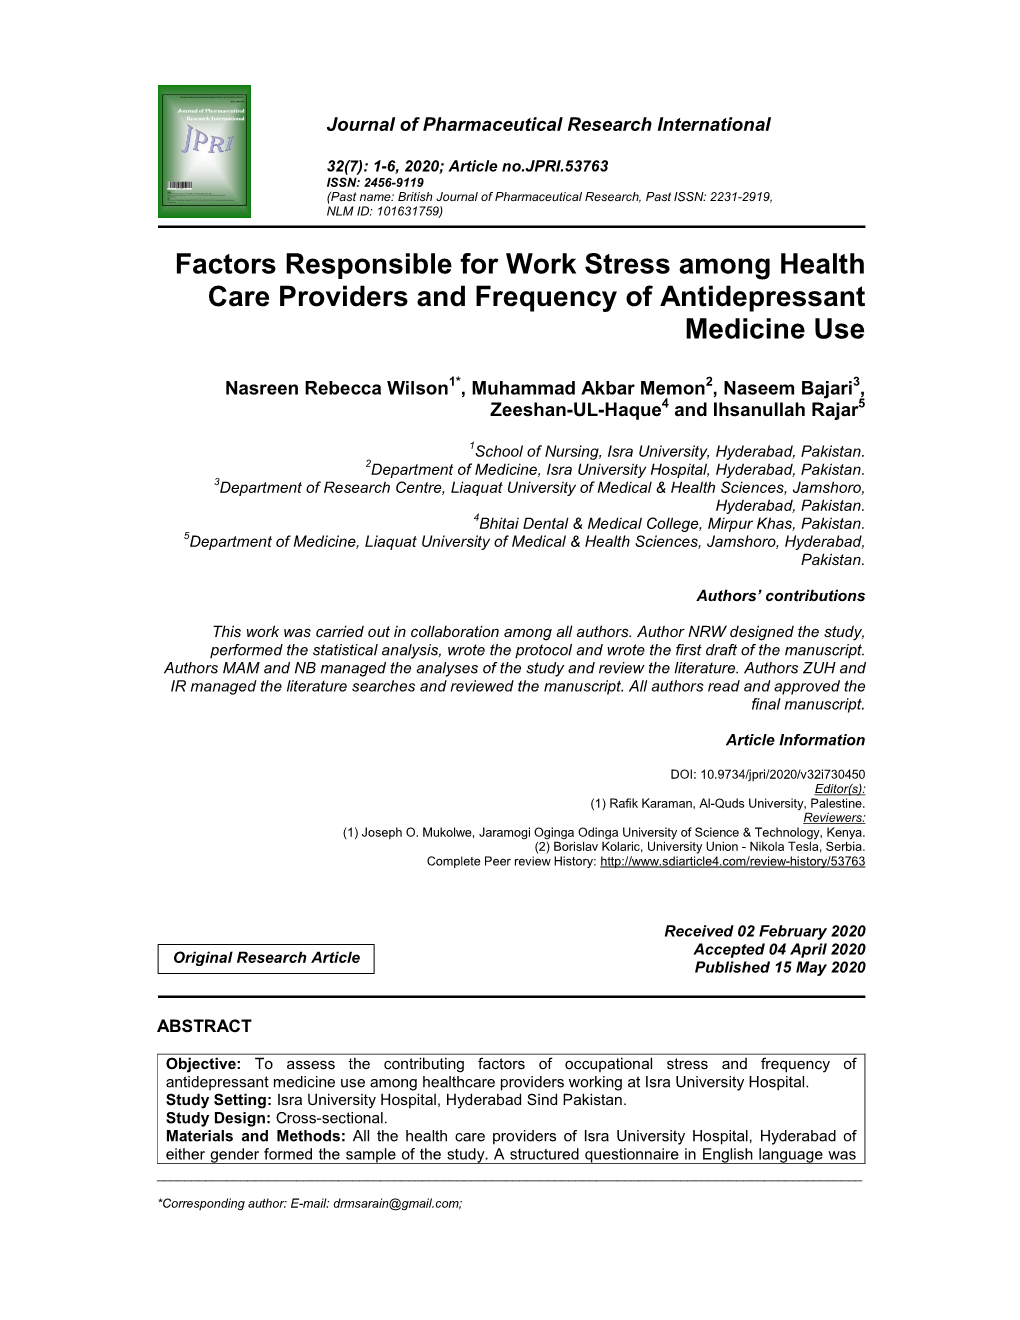 Factors Responsible for Work Stress Among Health Care Providers and Frequency of Antidepressant Medicine Use